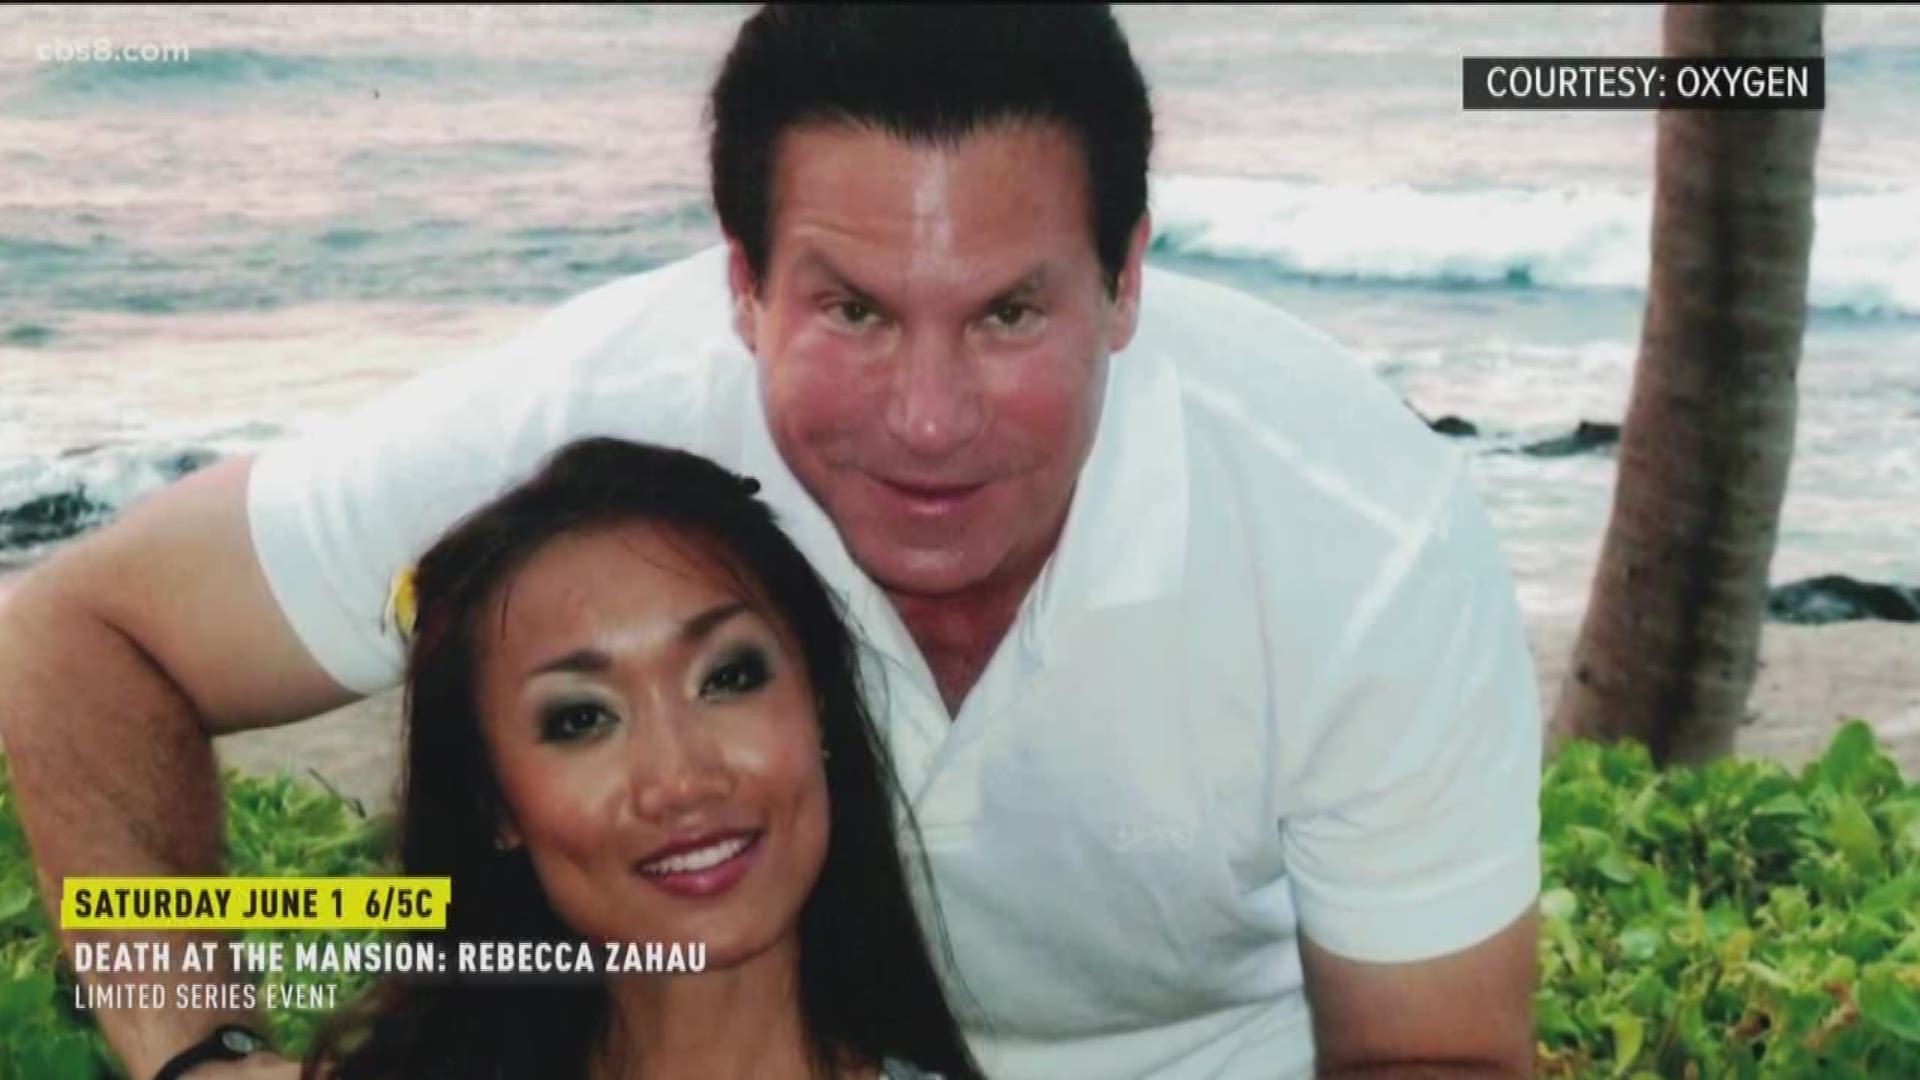 'Death at the Mansion: Rebecca Zahau,' will take 'deep dive' into the well-known case.